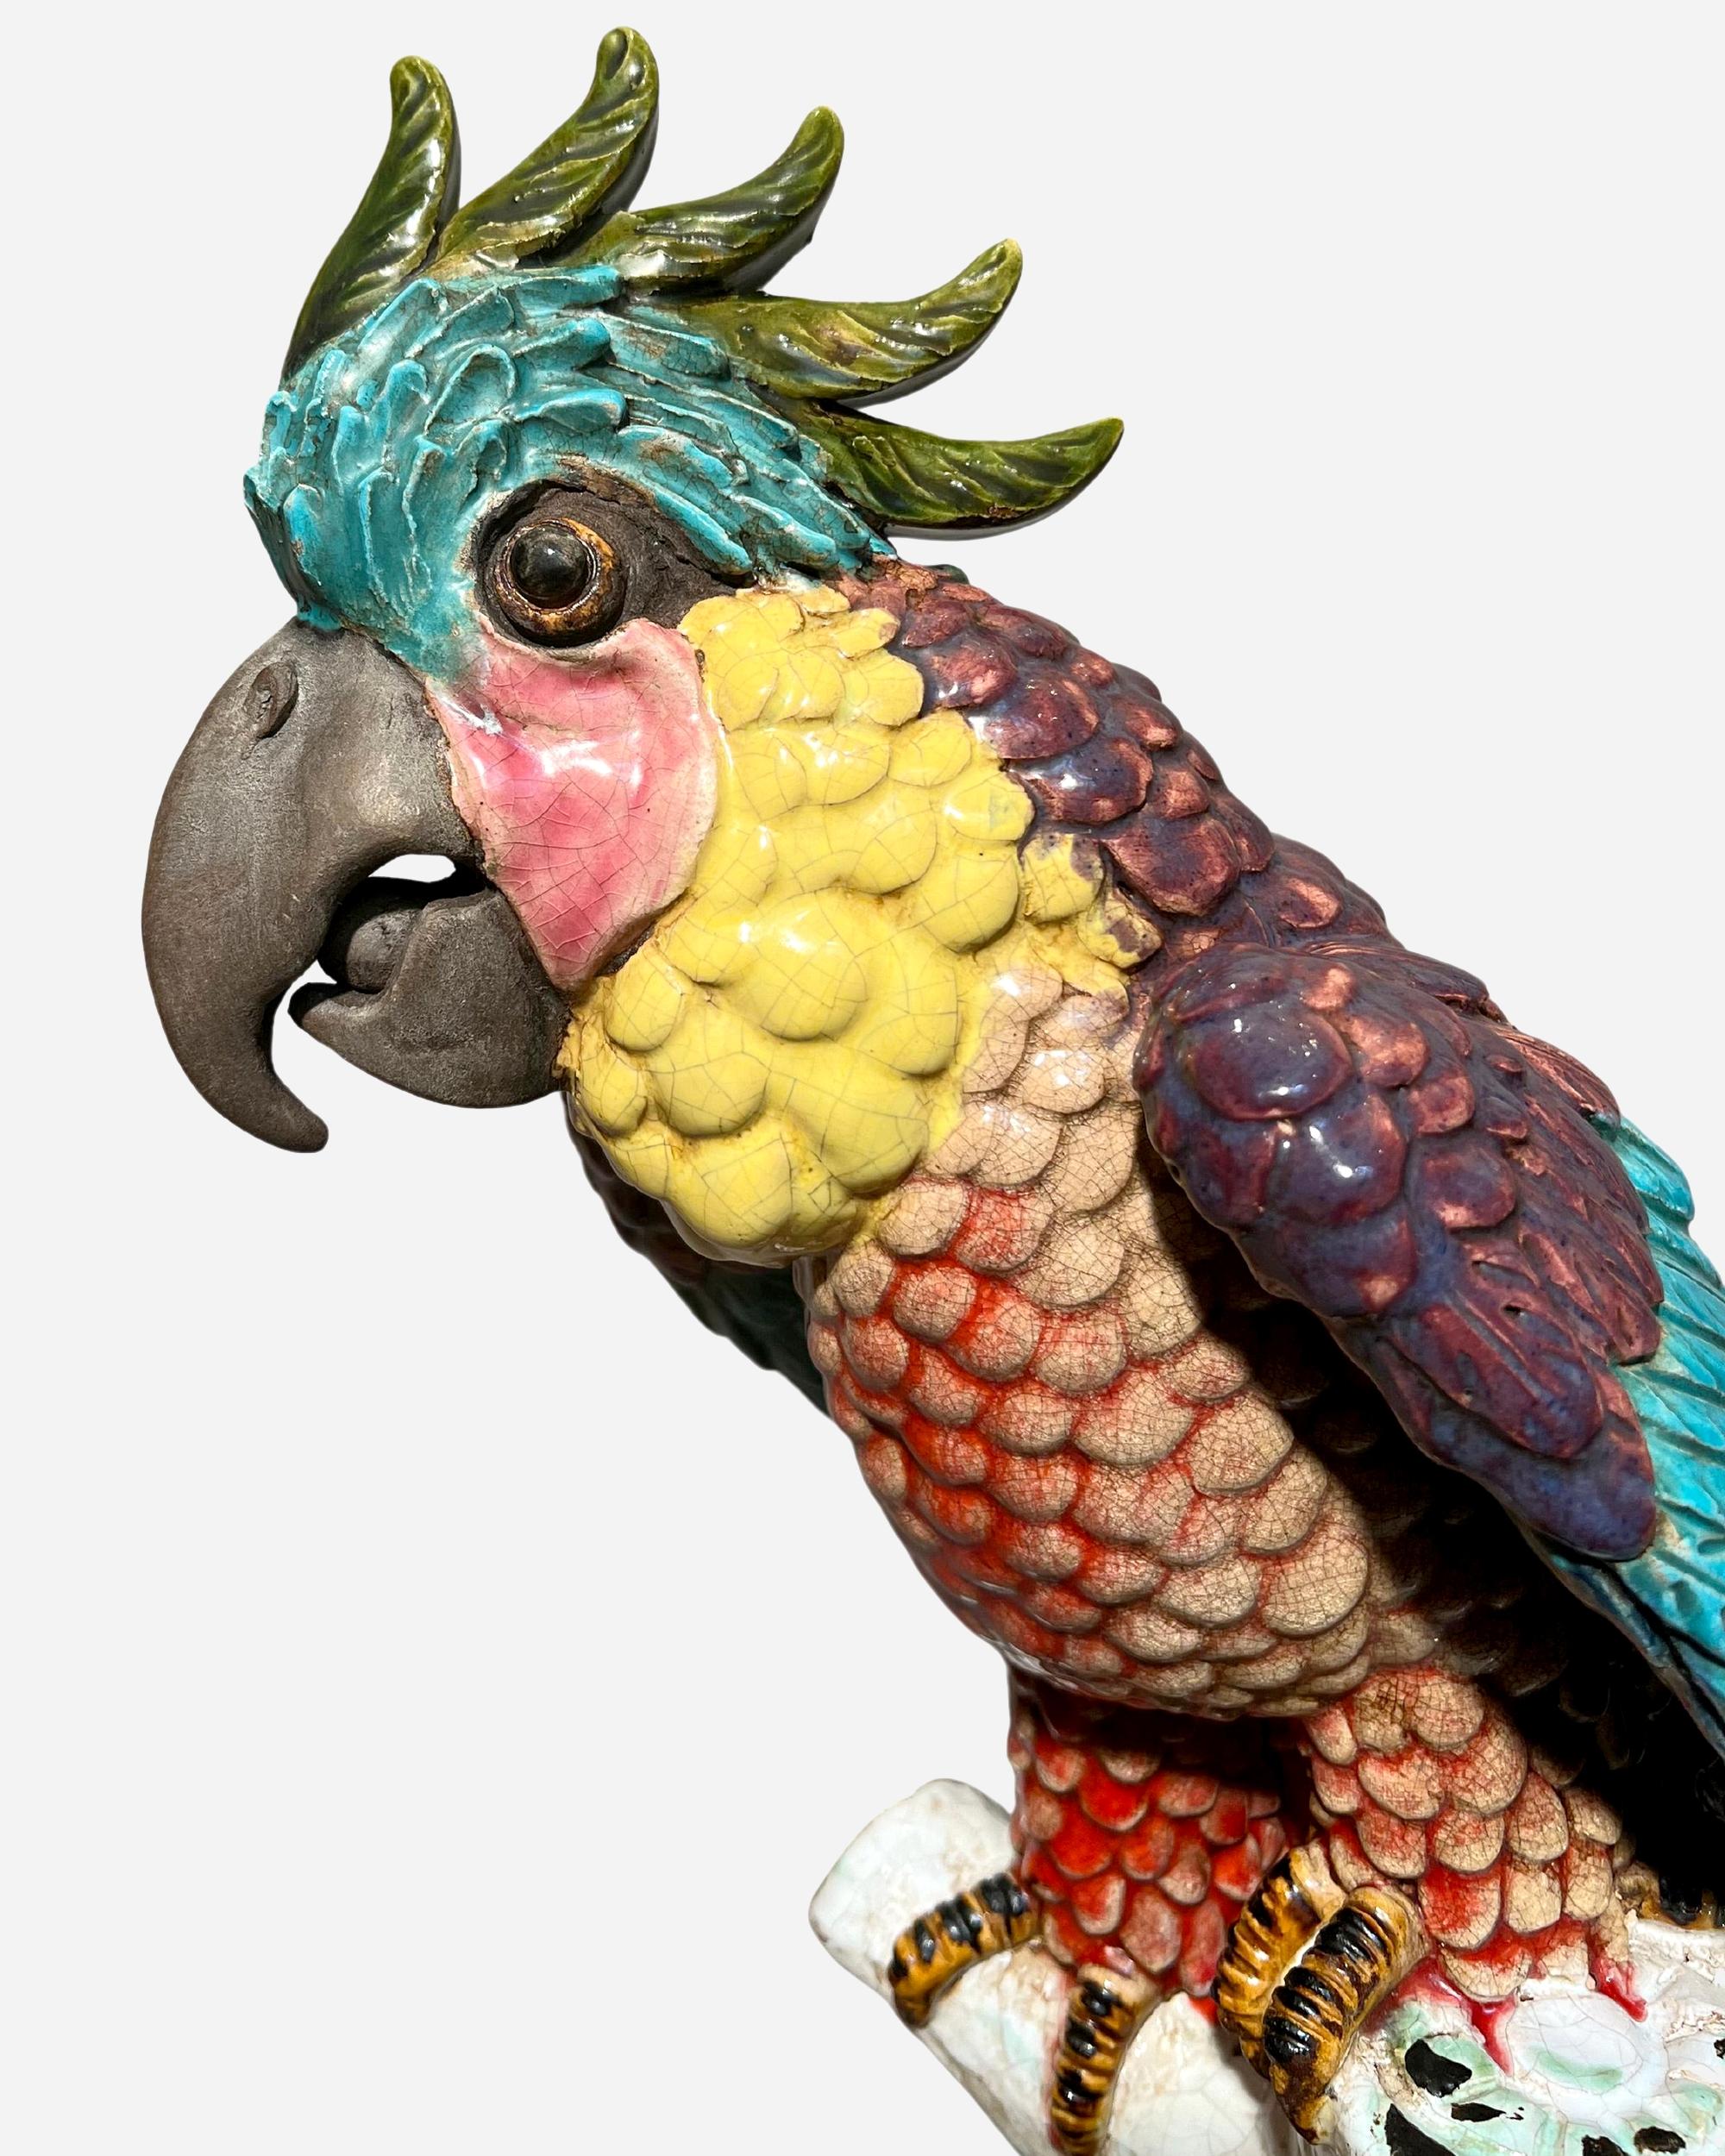 This large, multicolored cockatoo is perched on a tree trunk surrounded by bamboo and rocks.
Signature and stamp on base.
Height: 76 cm (30 inches)
Diameter: 30 cm (11.8 inches)
